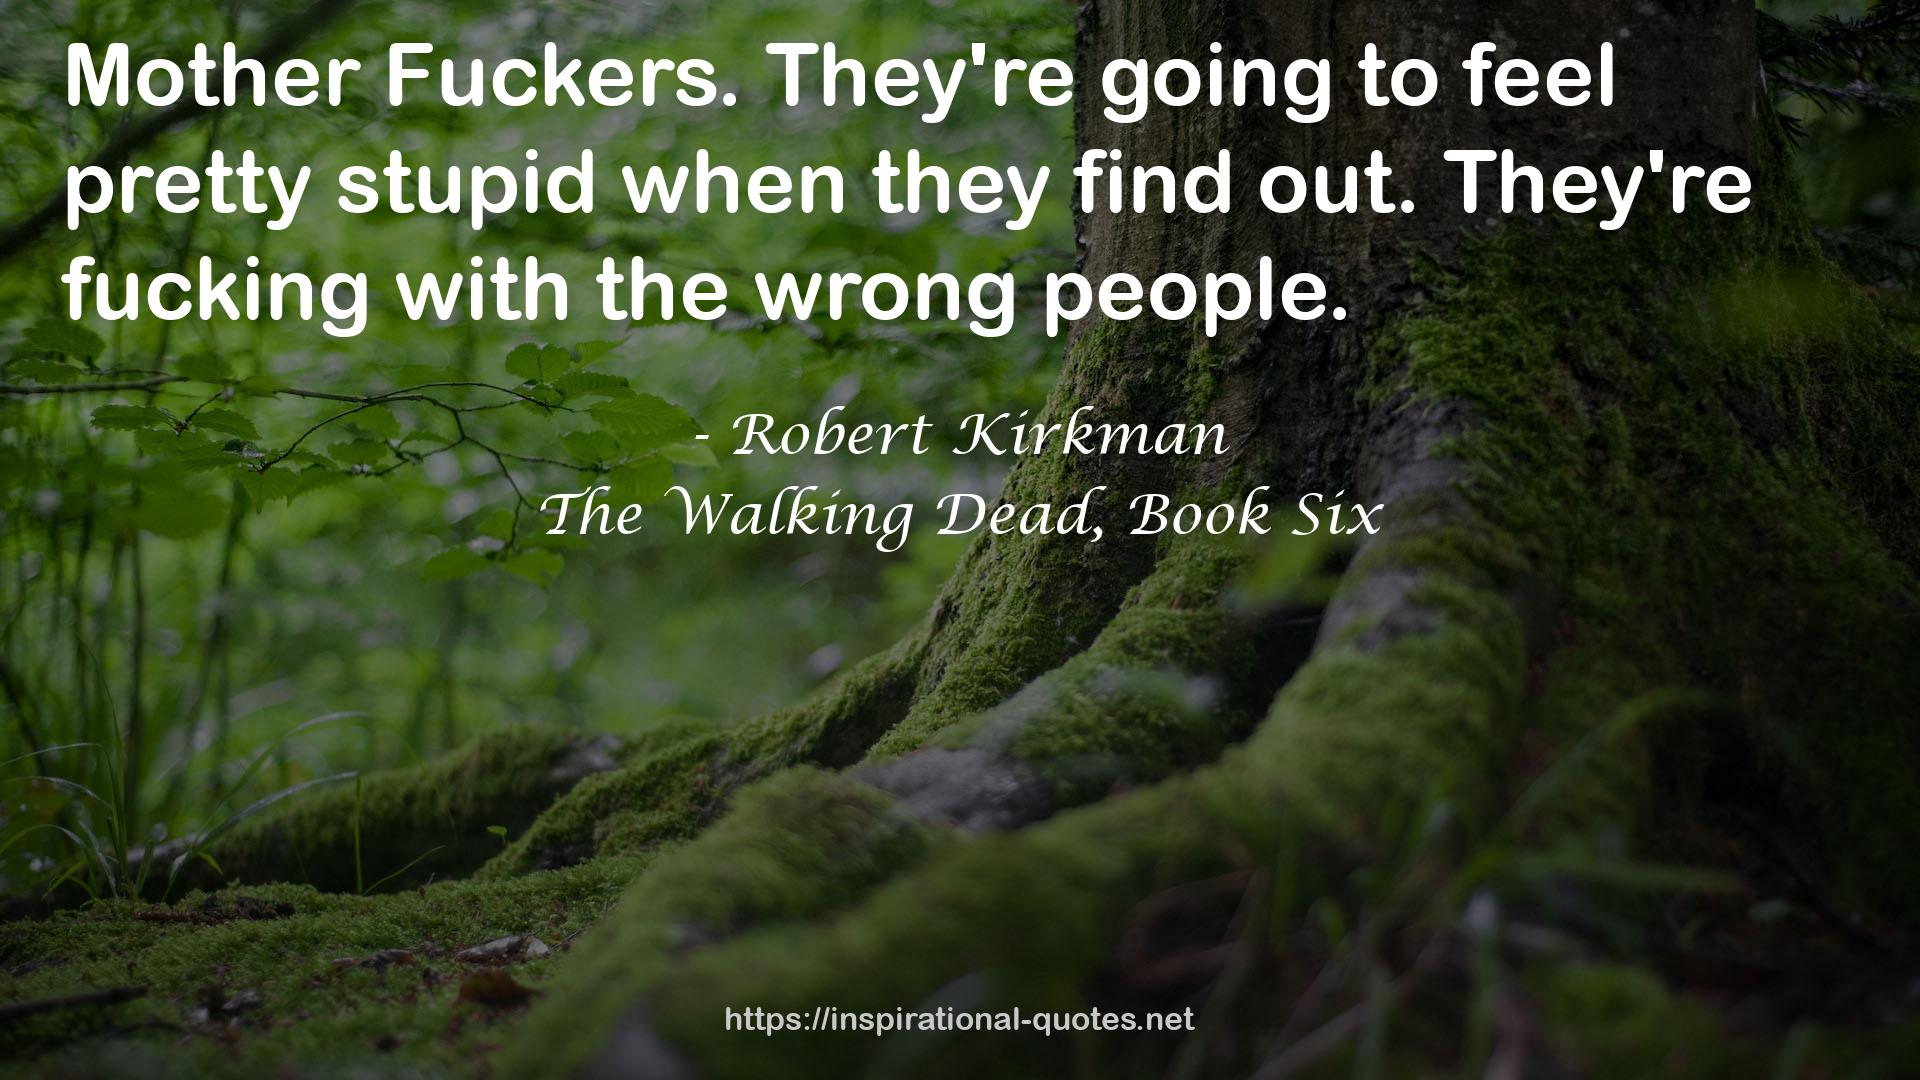 The Walking Dead, Book Six QUOTES